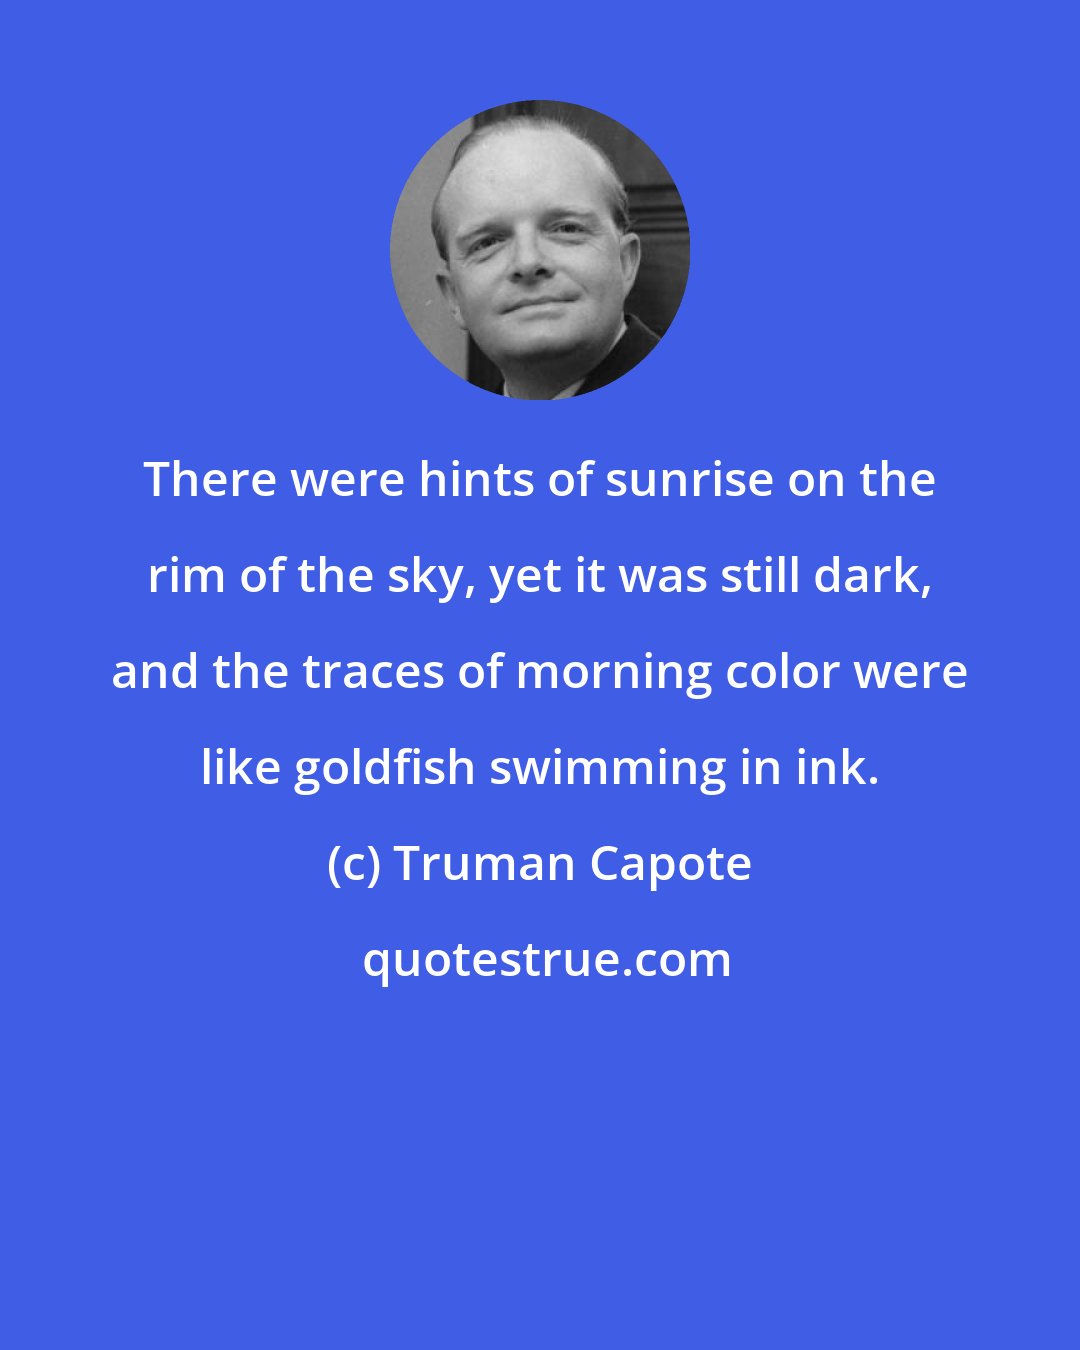 Truman Capote: There were hints of sunrise on the rim of the sky, yet it was still dark, and the traces of morning color were like goldfish swimming in ink.